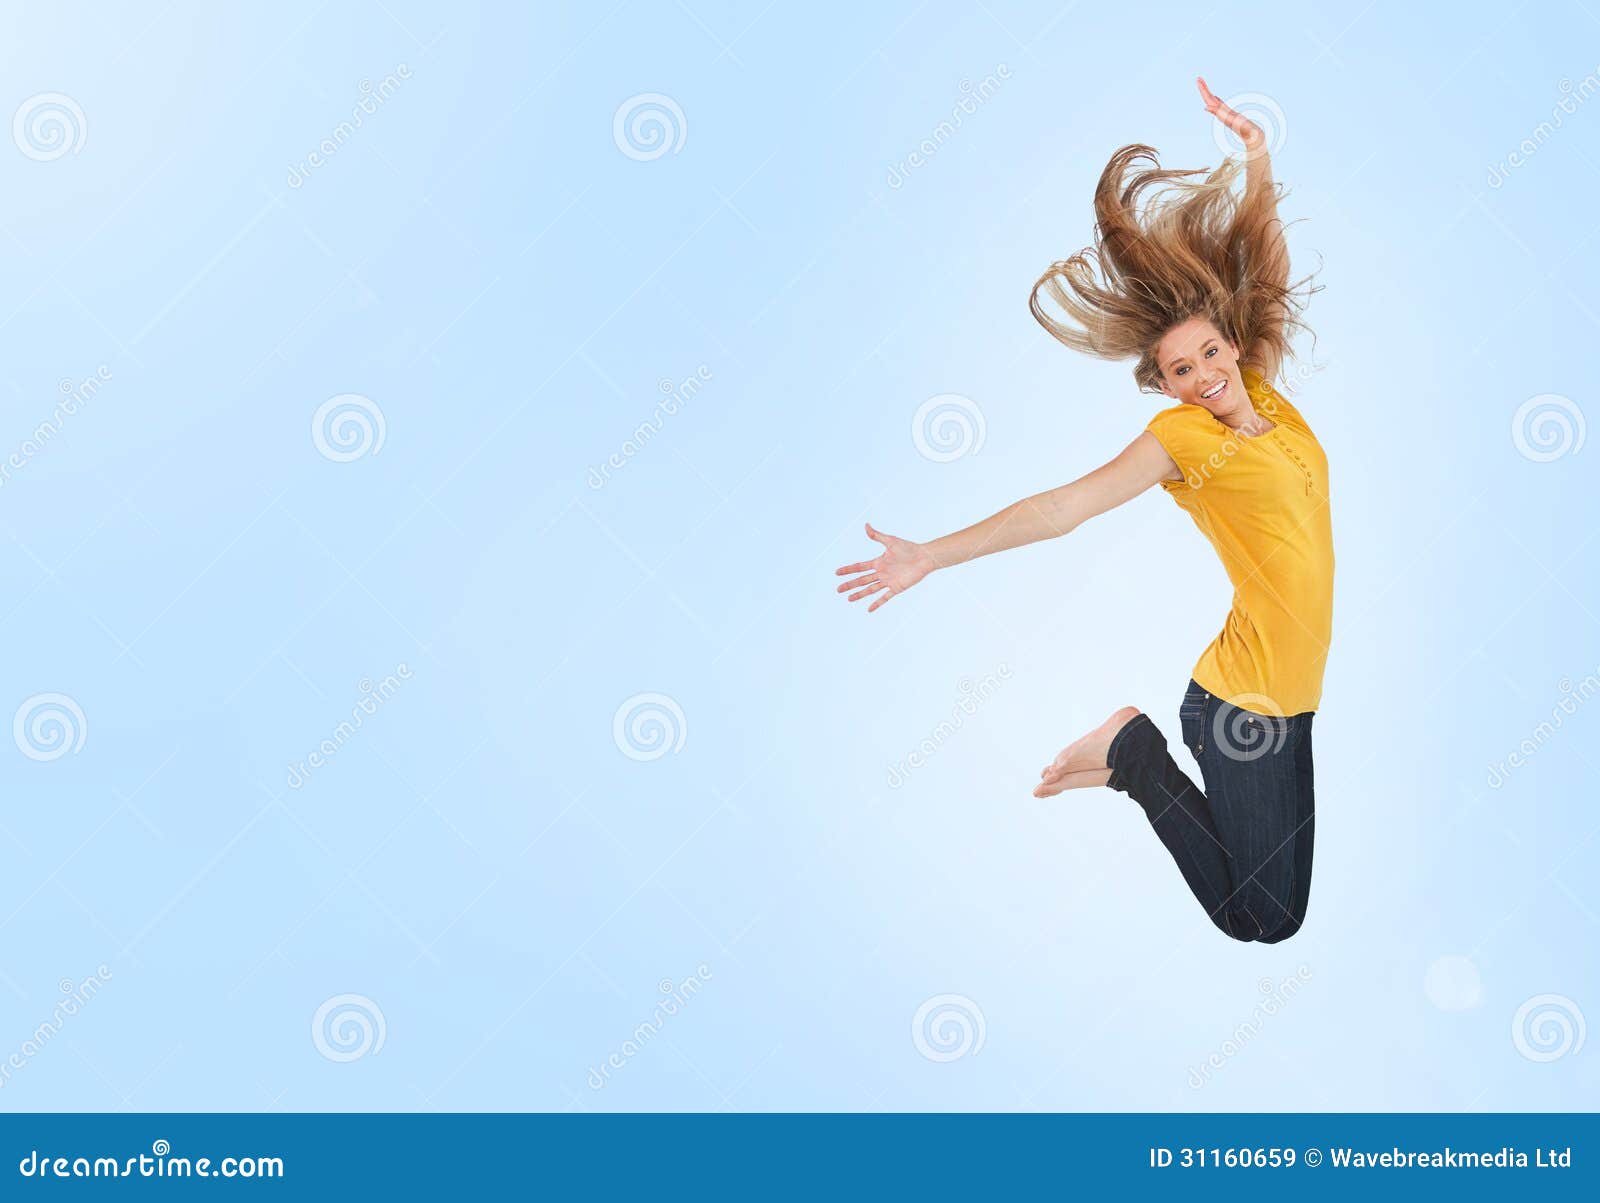 clipart woman jumping for joy - photo #37